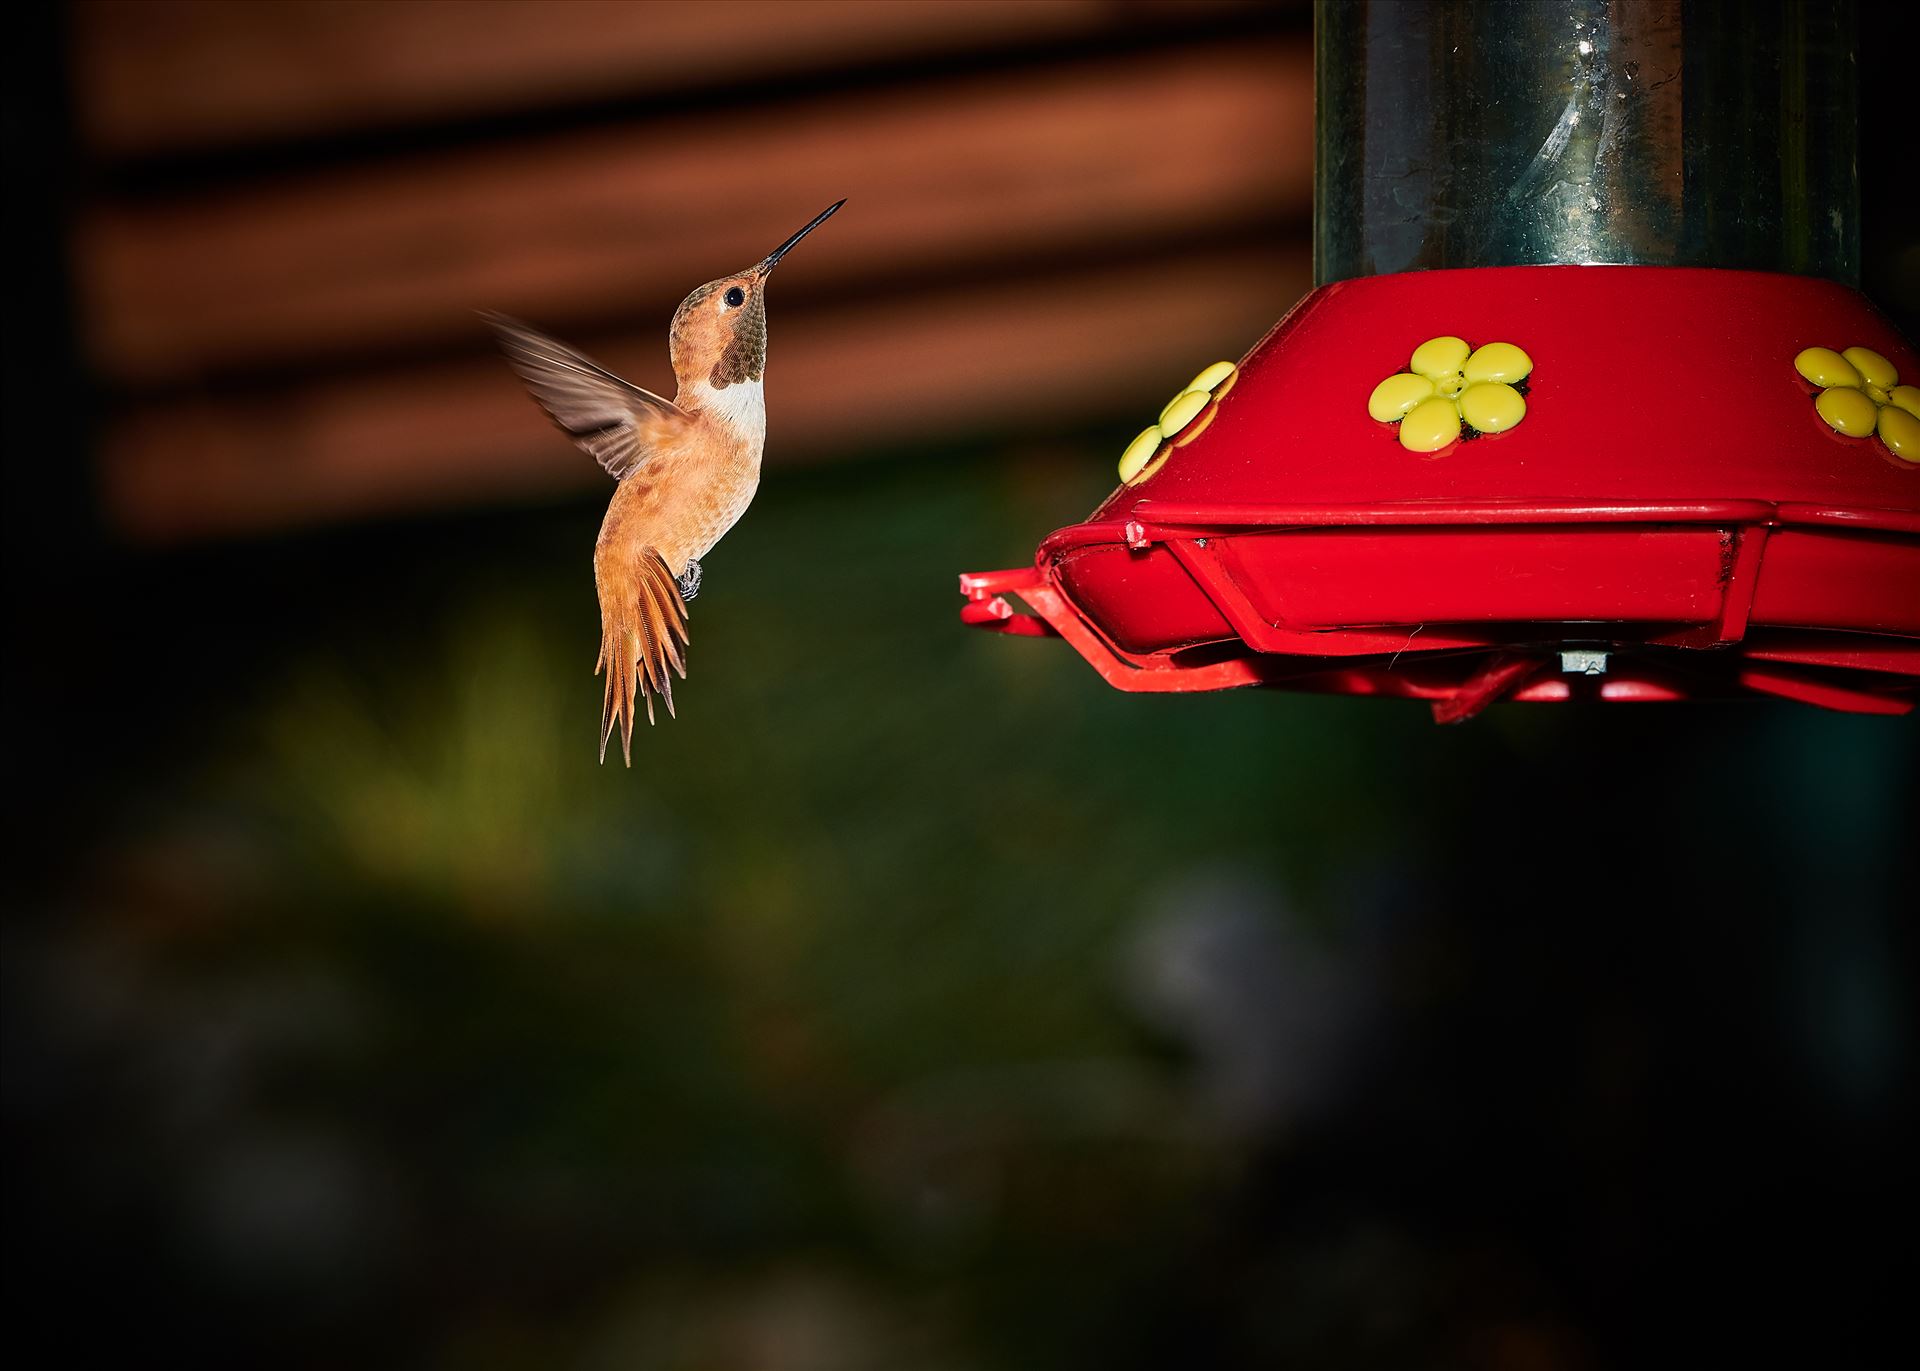 hummingbird hovering near feeder 8500590 ss as sf.jpg Hummingbird hovering near feeder, Cloudcroft New Mexico, Lincoln National Forest by Terry Kelly Photography